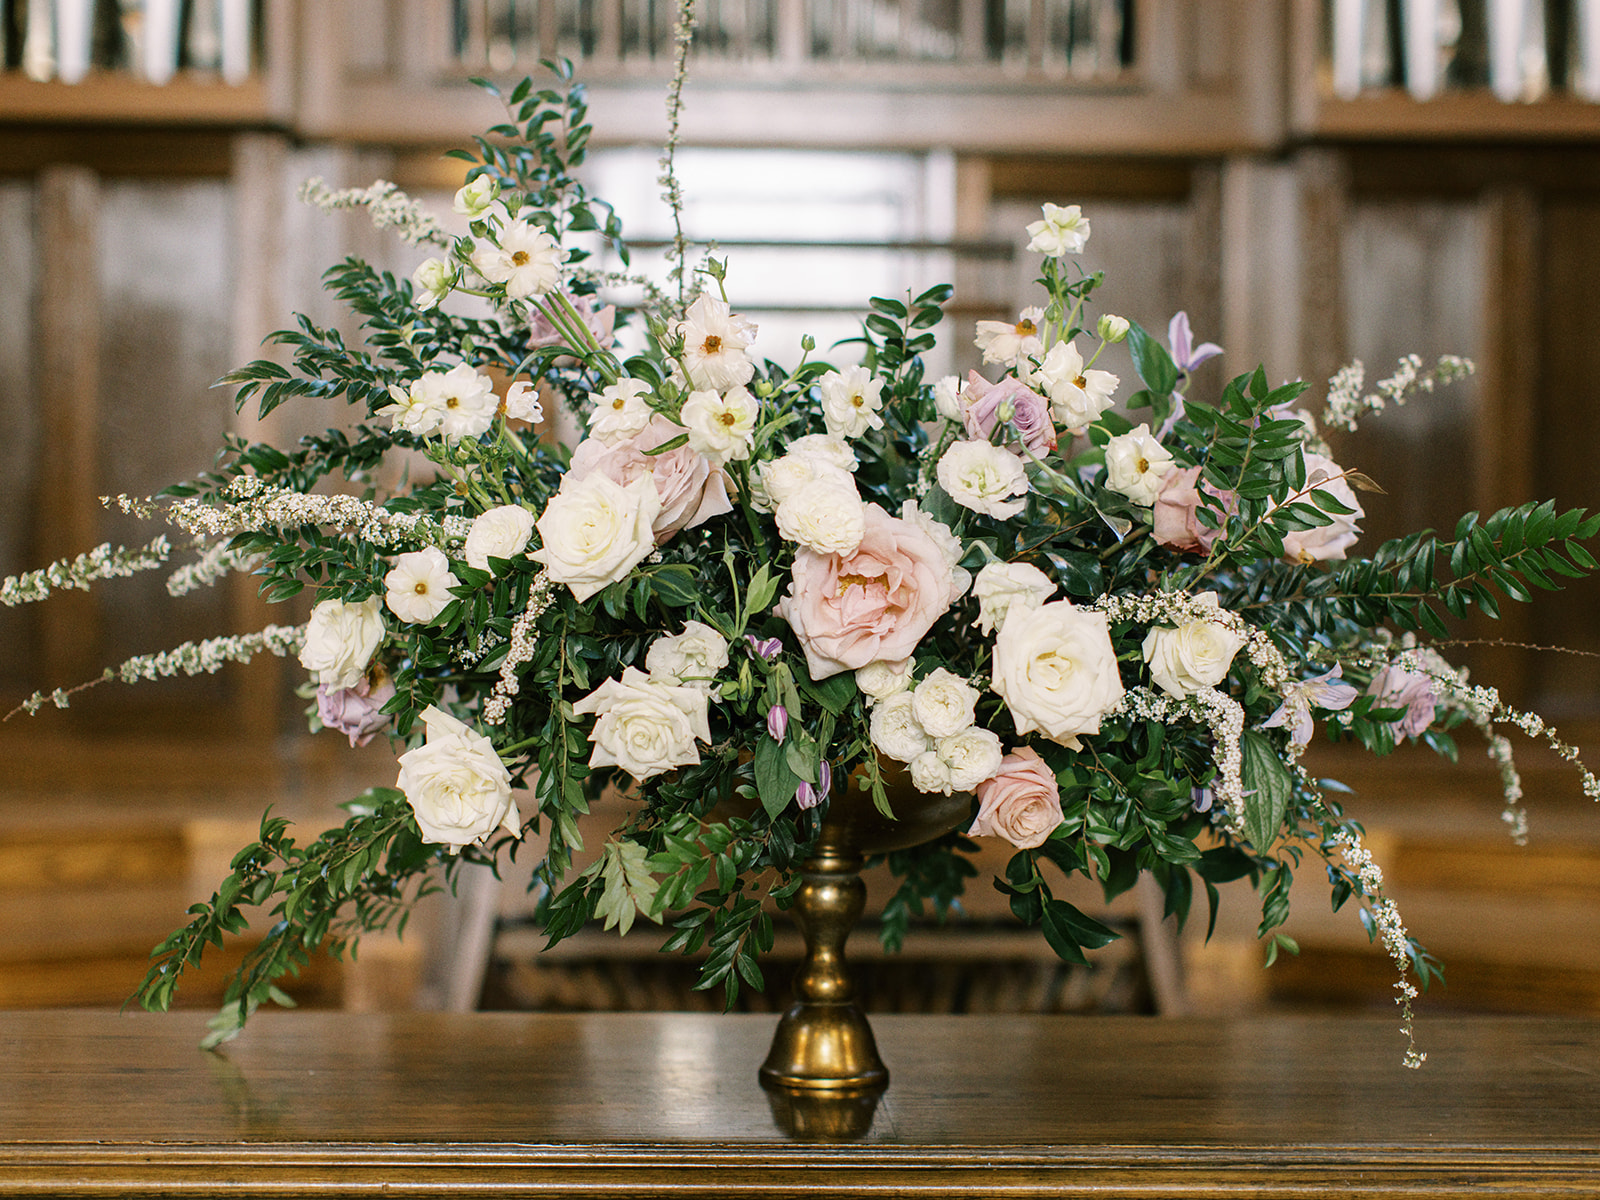 Spring cathedral wedding in the Scarritt Bennett Center in downtown Nashville, TN. Classic floral accents of garden urns and aisle markers in hues of white, green, cream, mauve, and lavender featuring roses, peonies, ranunculus, clematis, and spirea. Design by Rosemary and Finch Floral Design in Nashville, TN. 